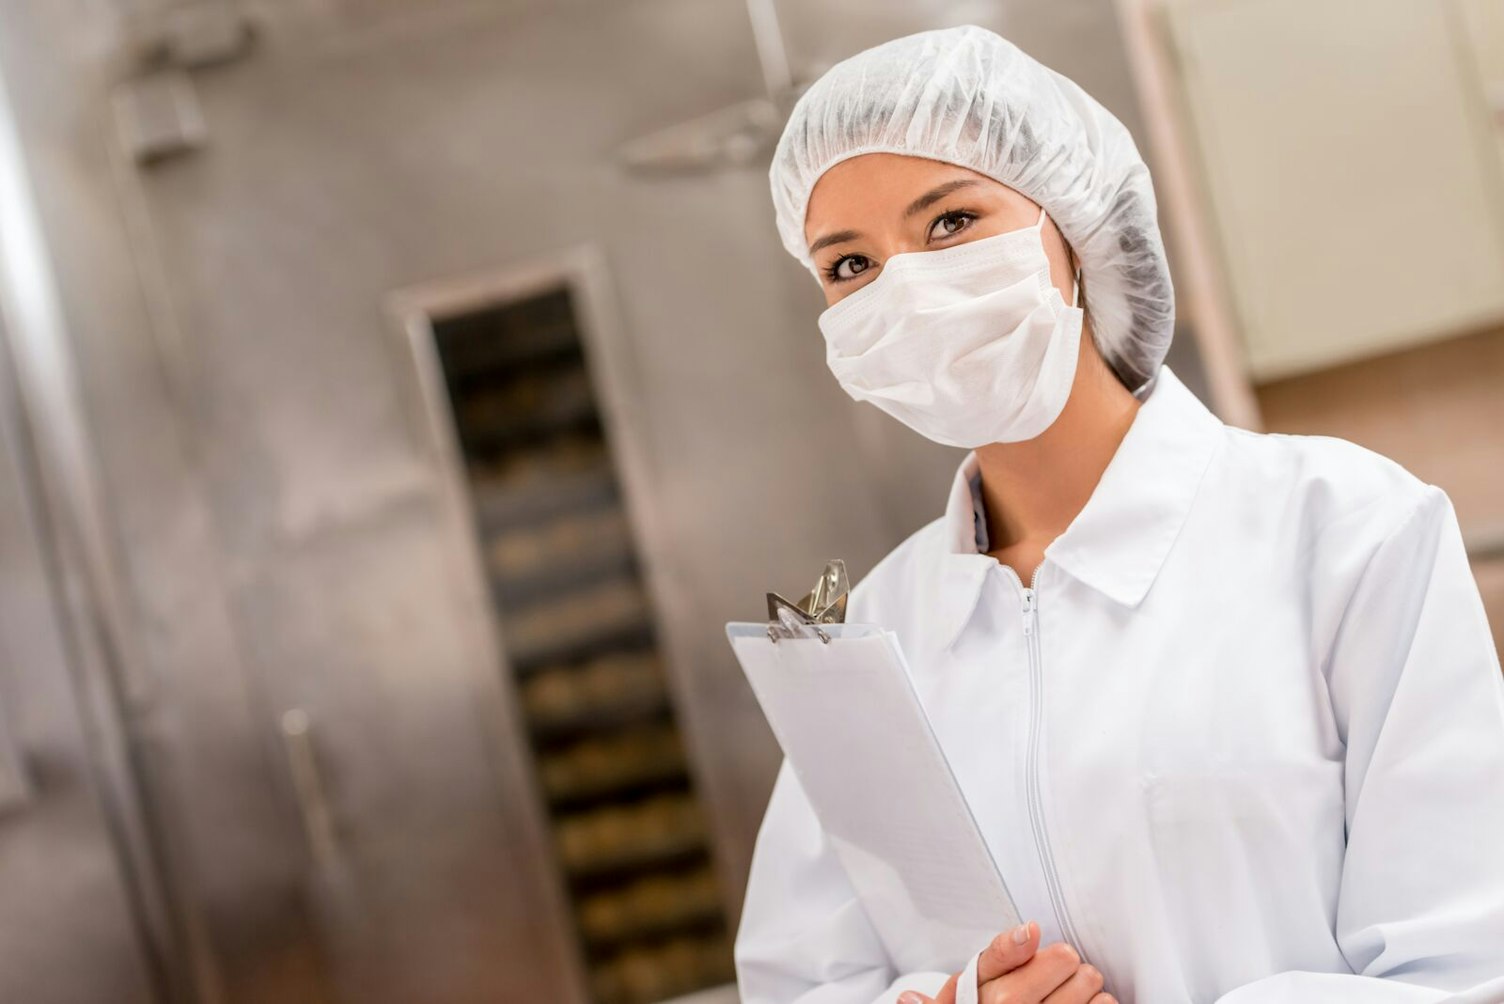 Woman Auditing a Food Factory